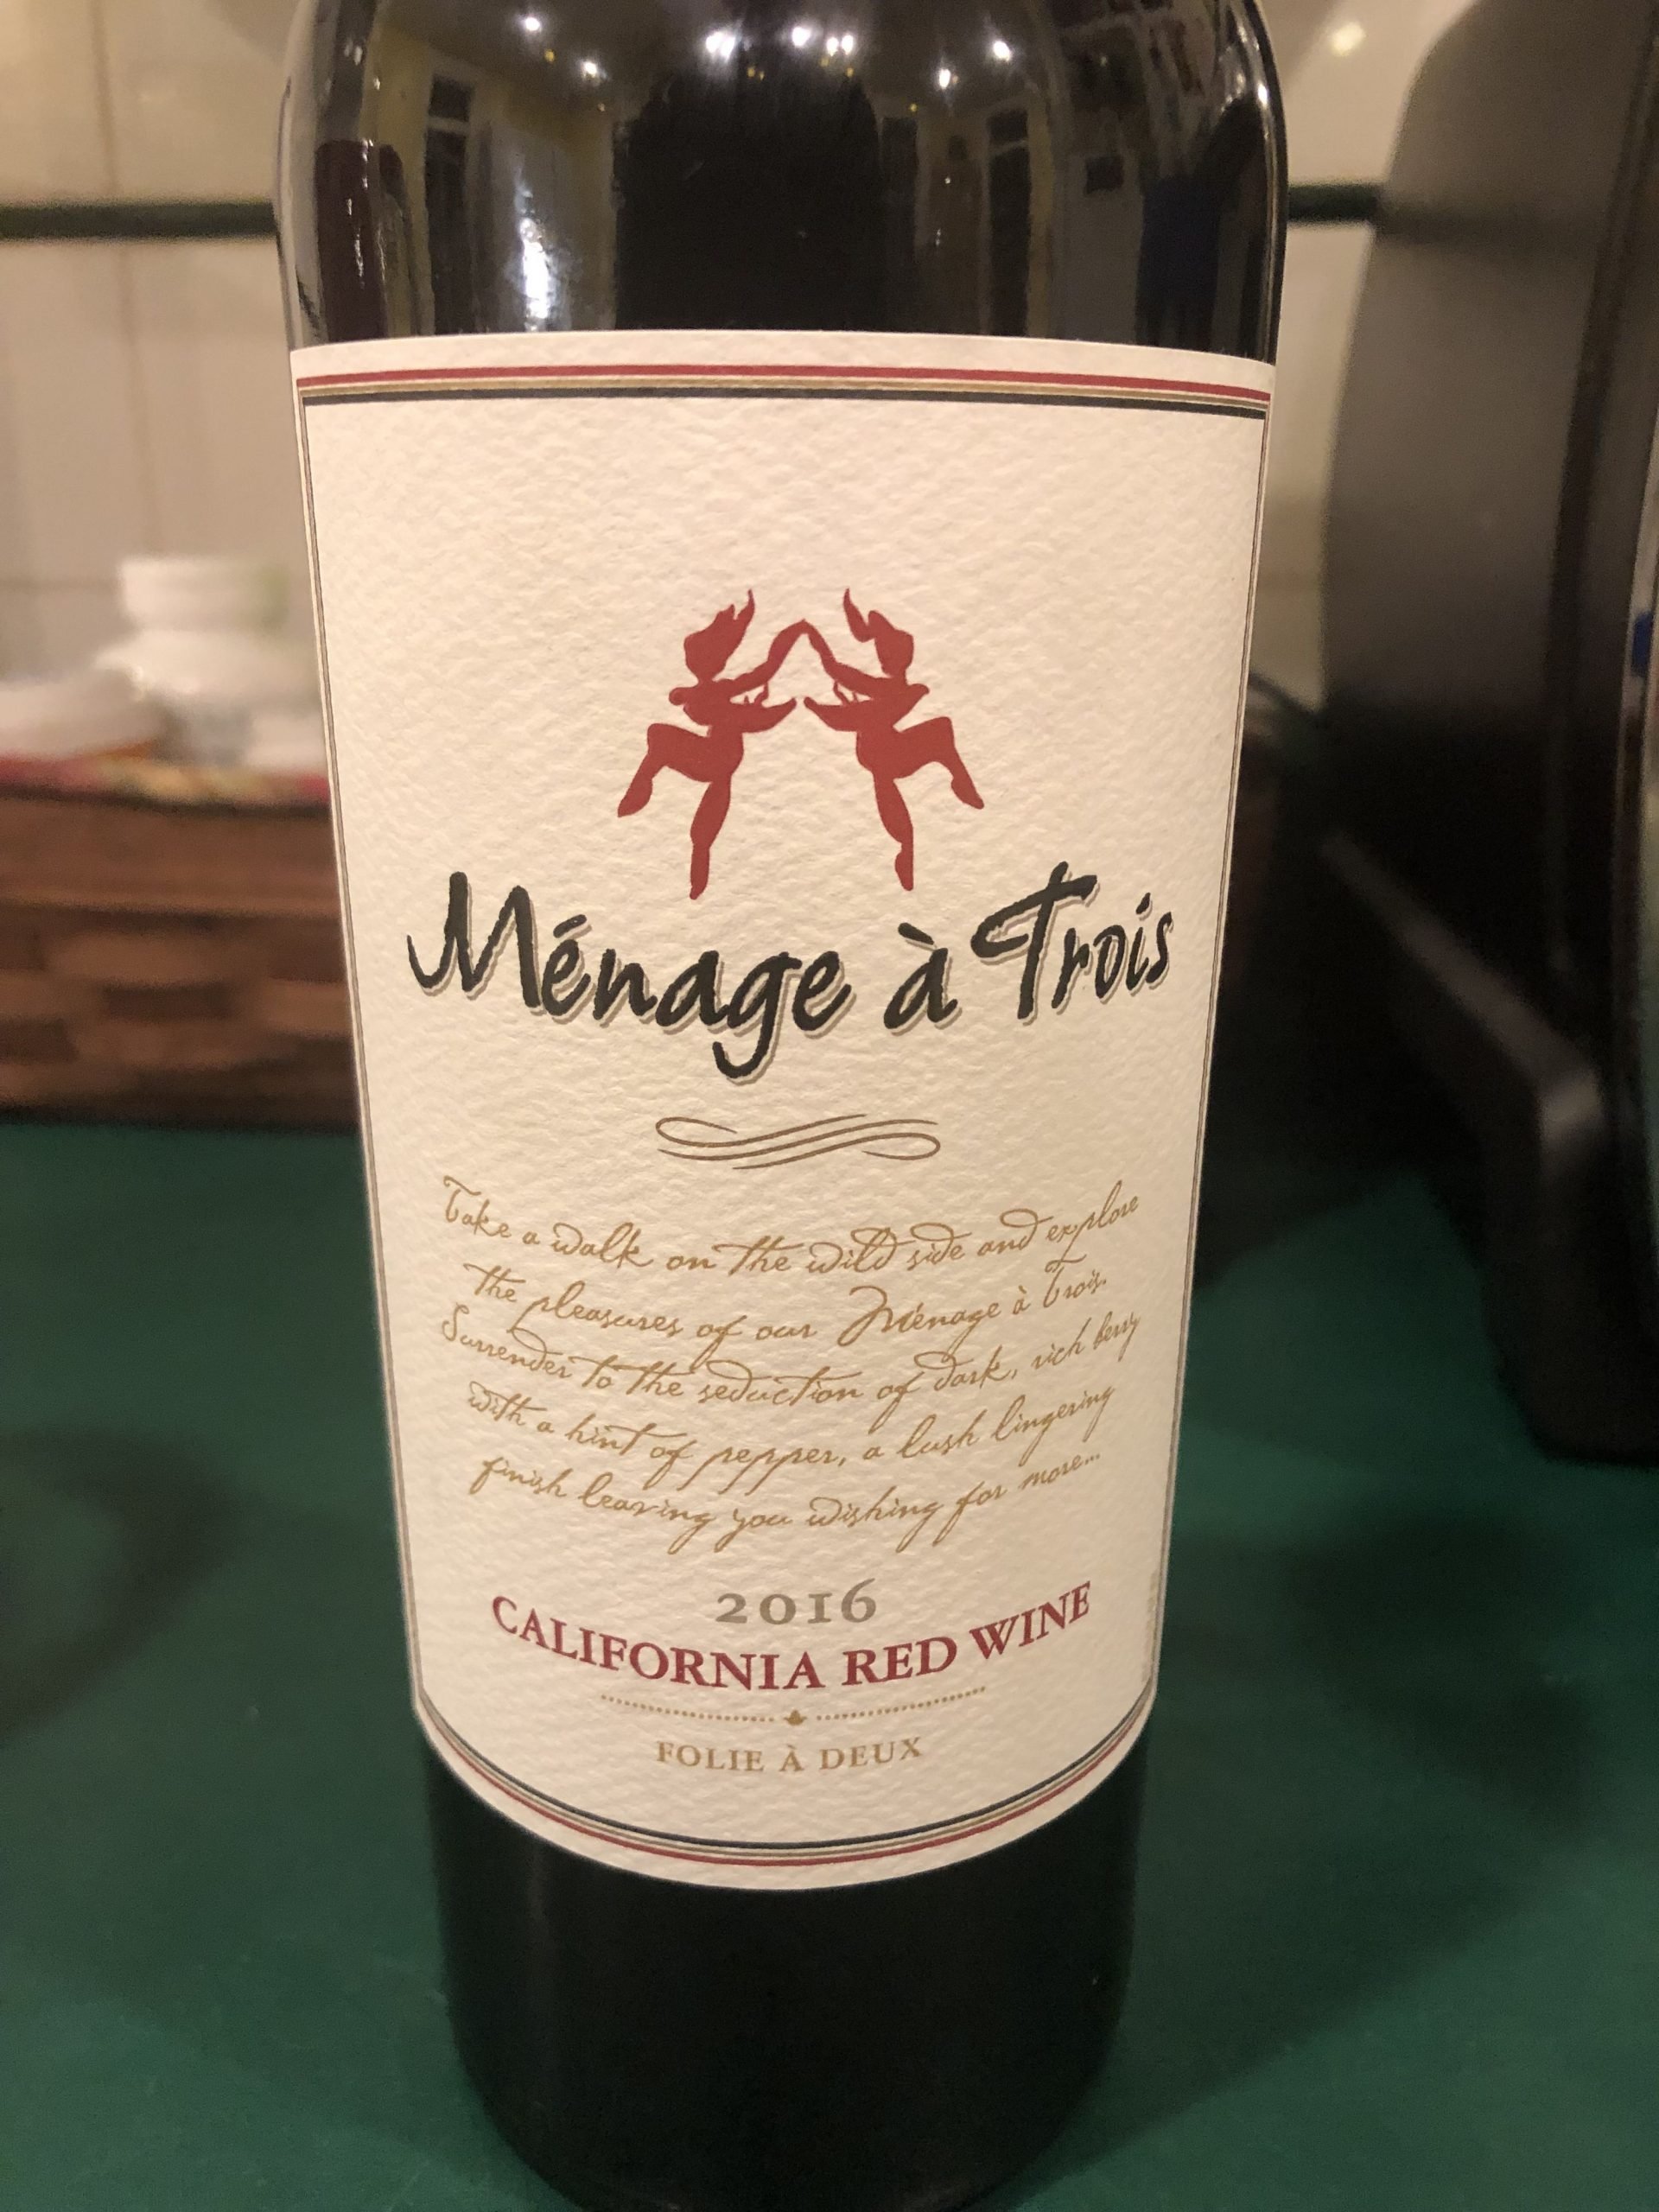 A California Red Wine: A blend based on 3 varietals